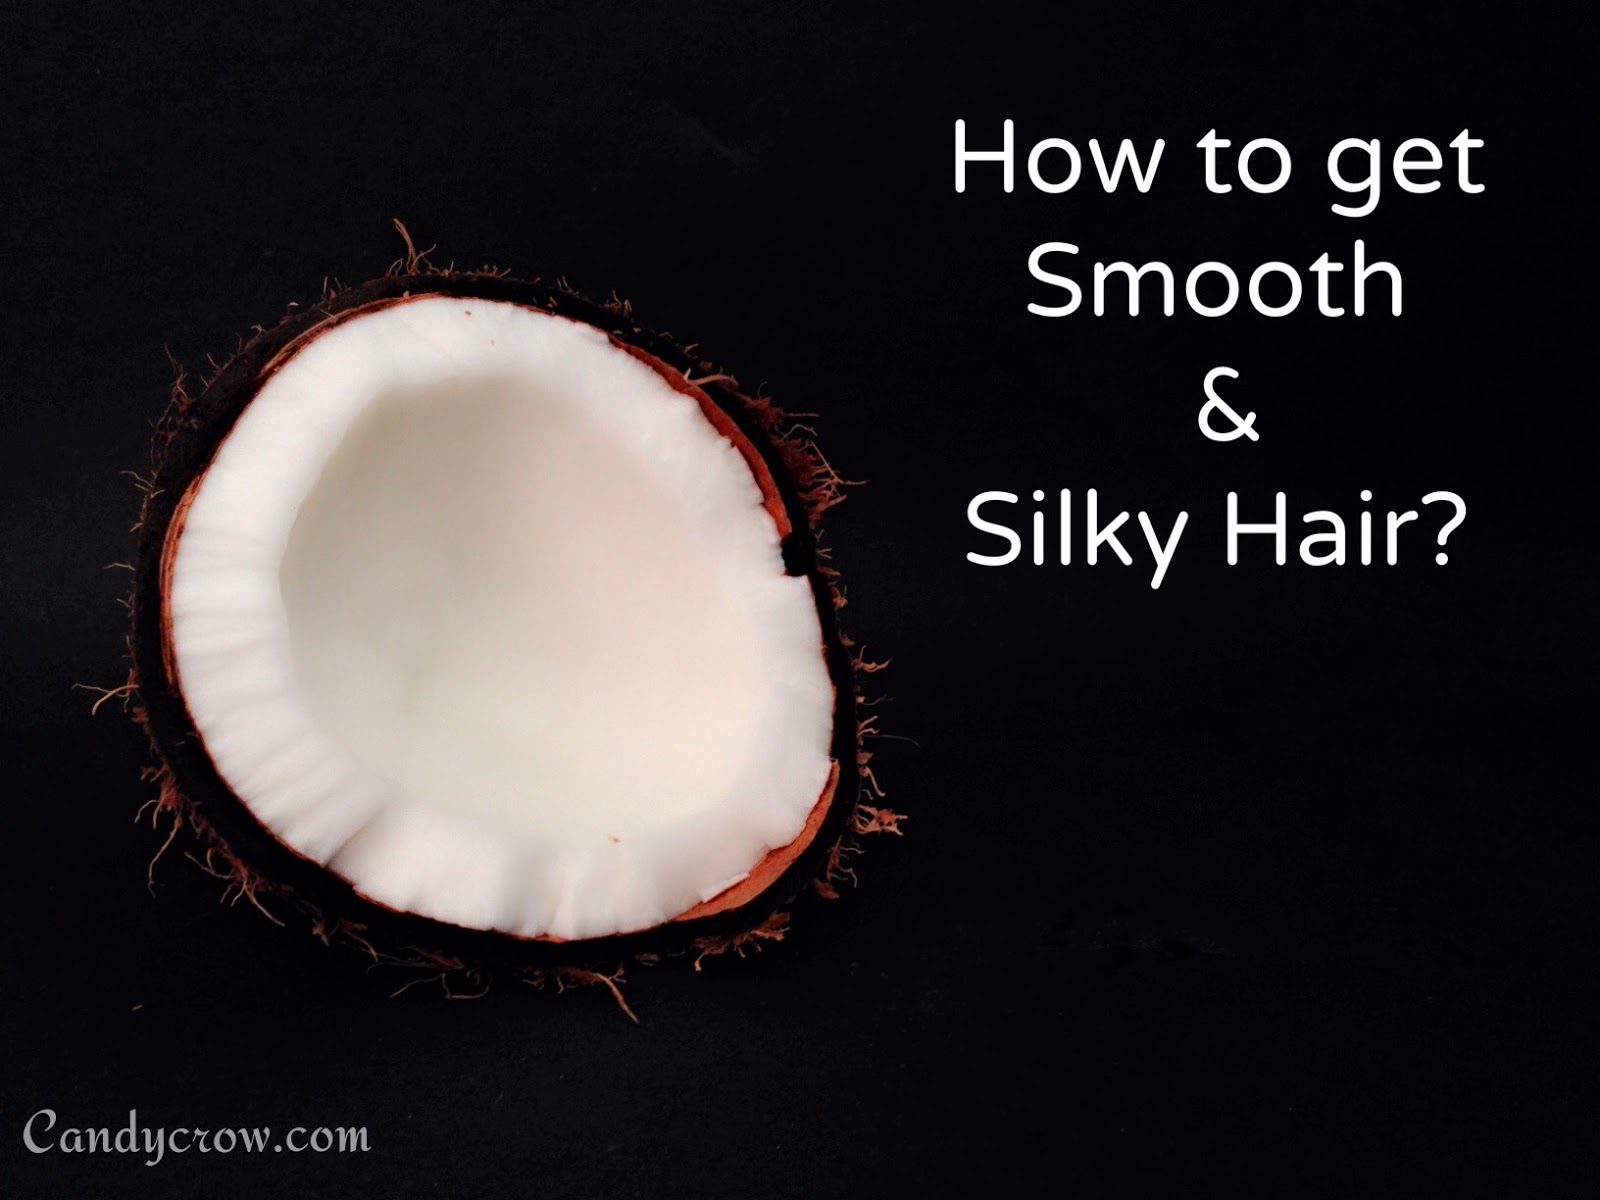 How to get Smooth and Silky Hair at Home?